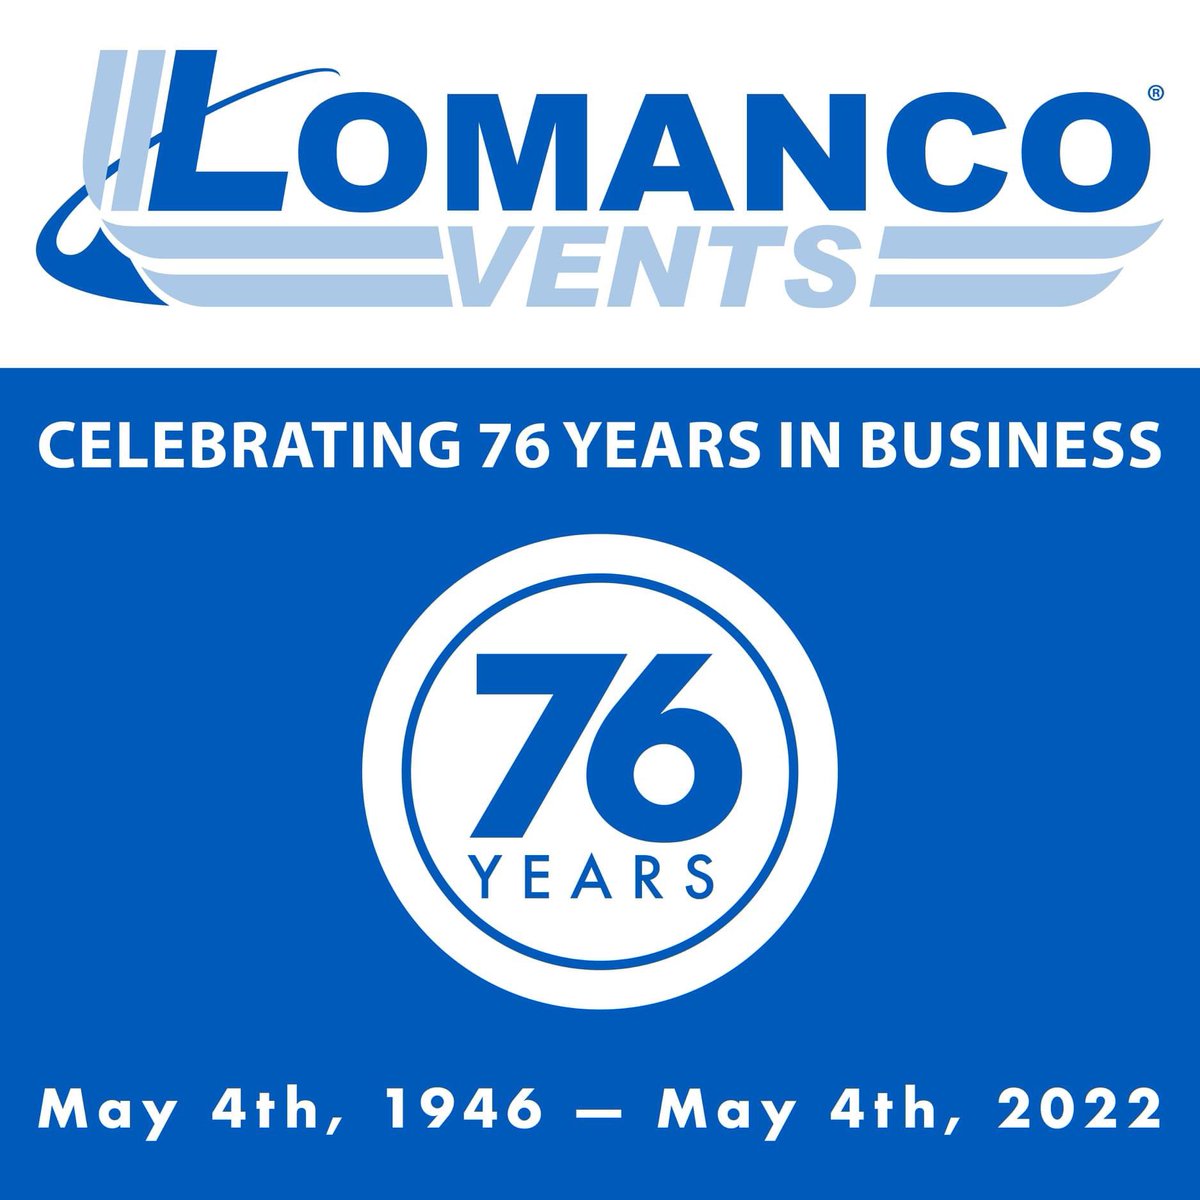 Did you know May the 4th was Lomanco  Day long before it was Star Wars day? 

It's our anniversary! 🎉

Thank you to everyone who has made 76 years in business possible! #AtticVentilation #VentSmarter #DonCovinVentPro